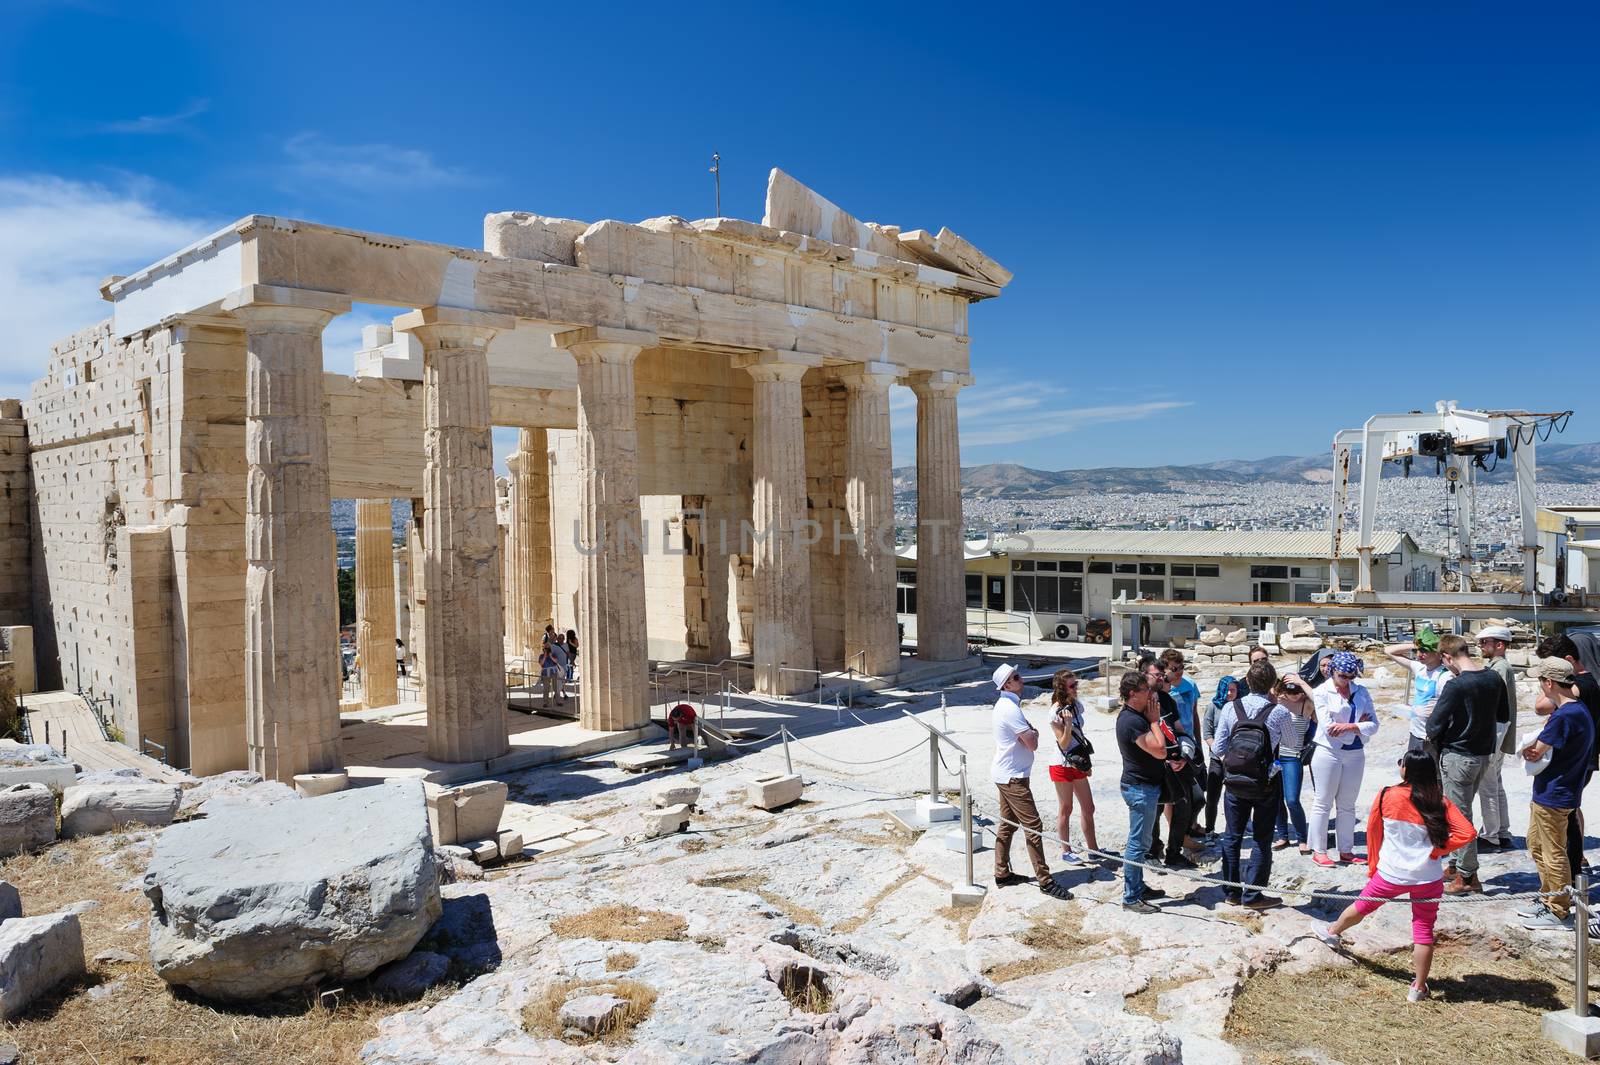 Athens, Greece - April 17th, 2016: People at Parthenon temple entrance on the Acropolis by starush